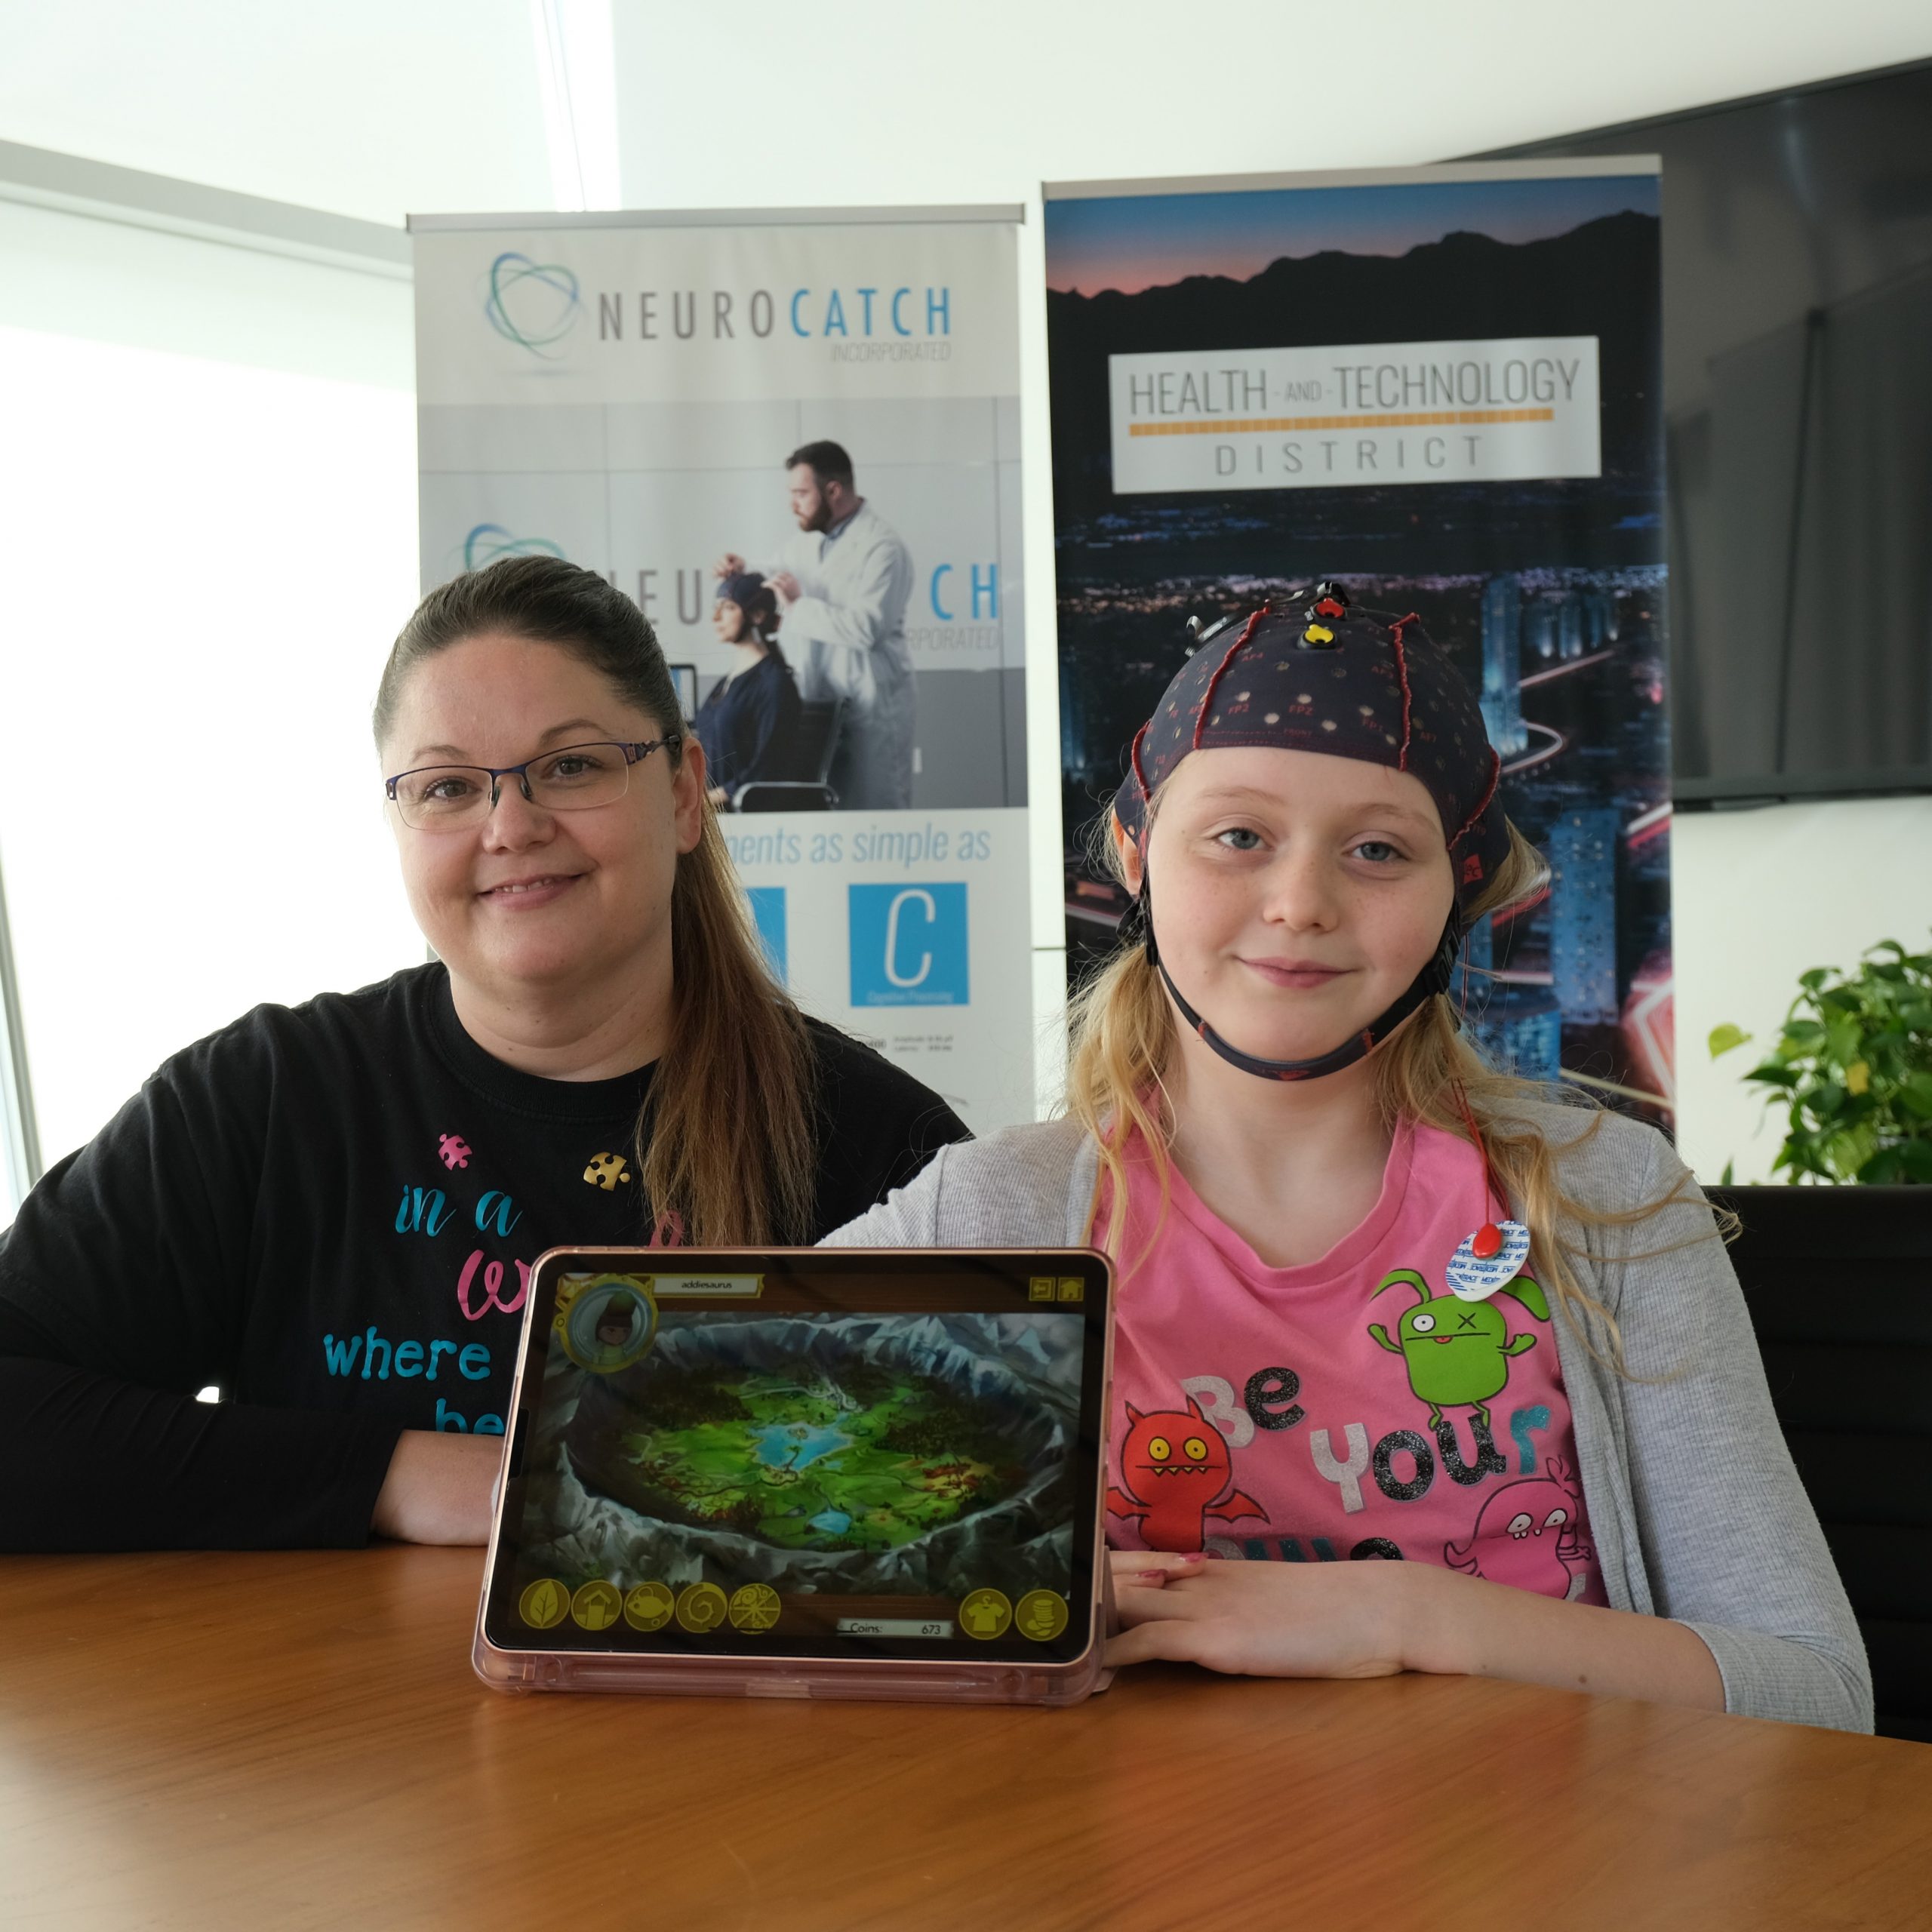 Volunteers needed to test video game to help children with neurodevelopmental disabilities [Global News]